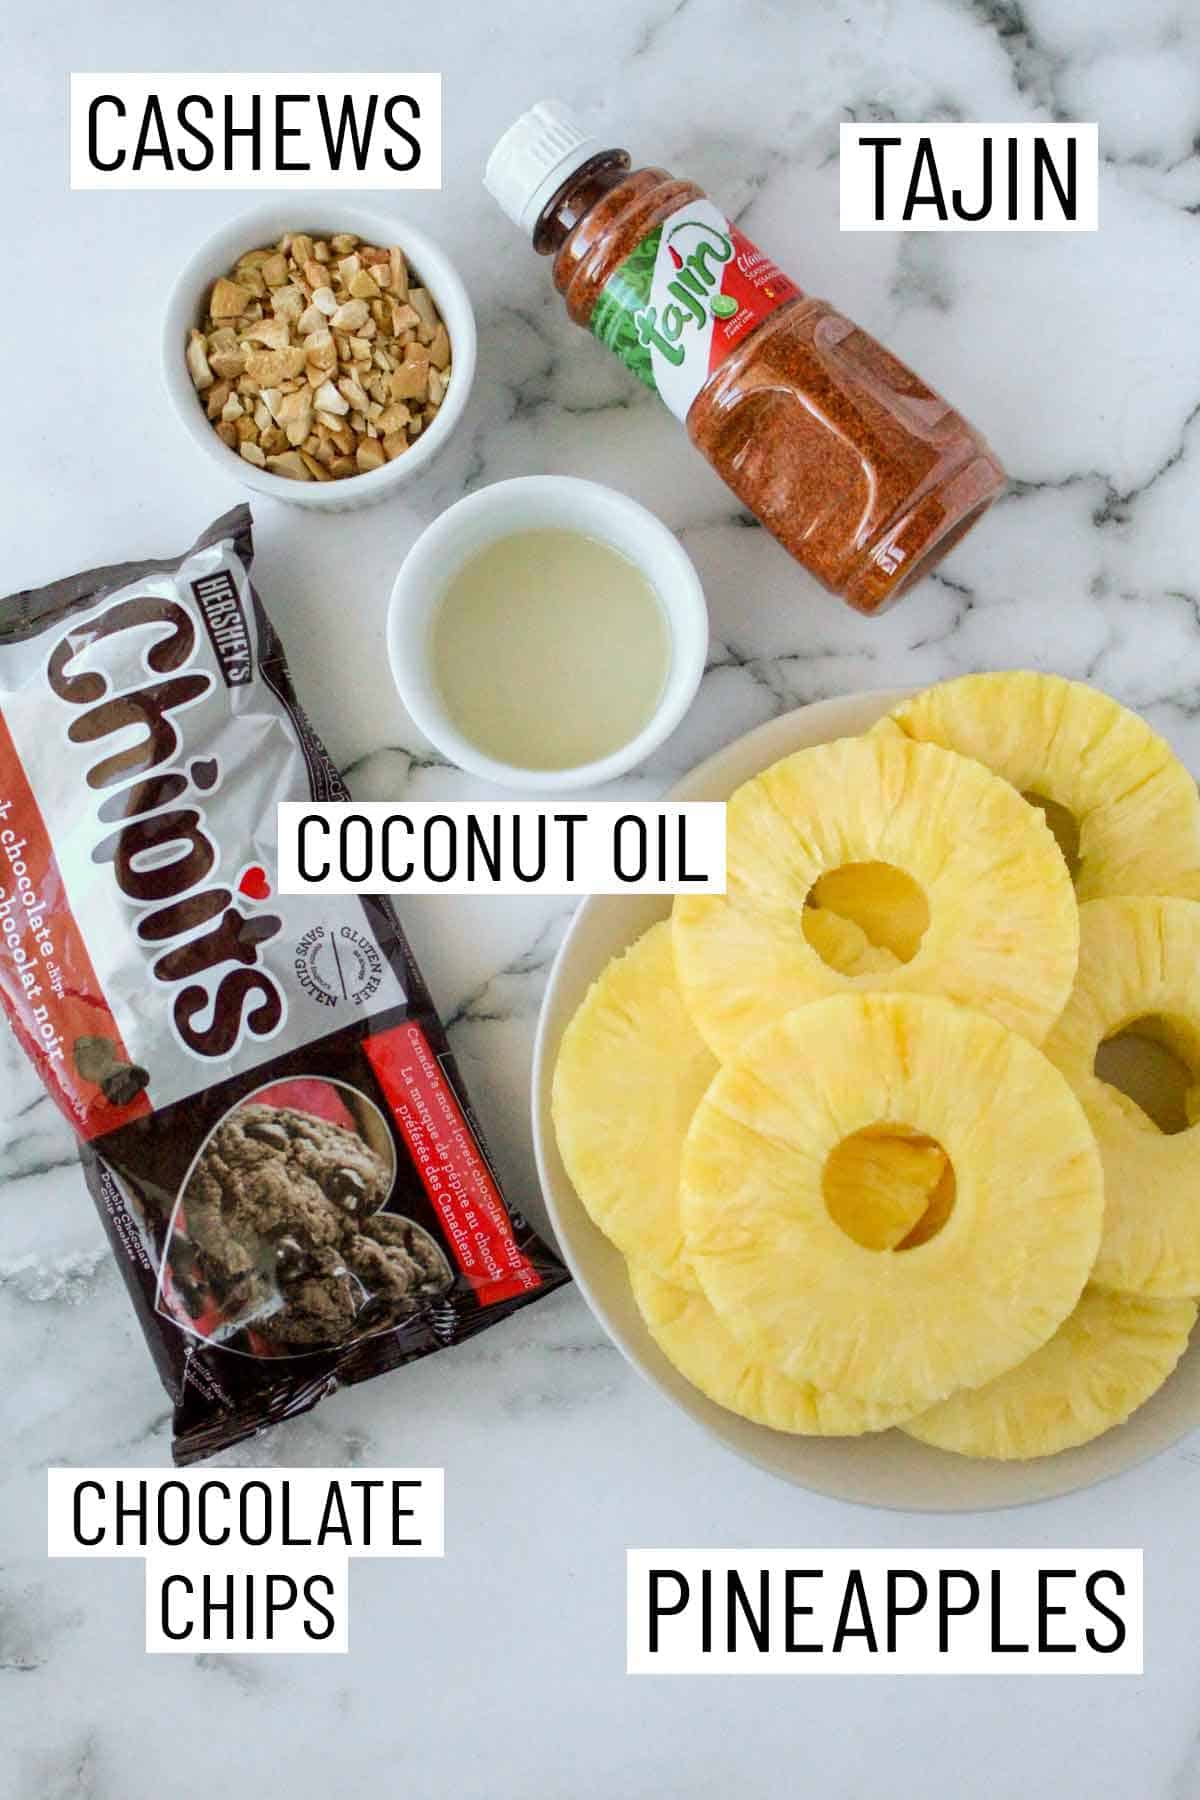 Ingredients needed to make chocolate dipped pineapple.